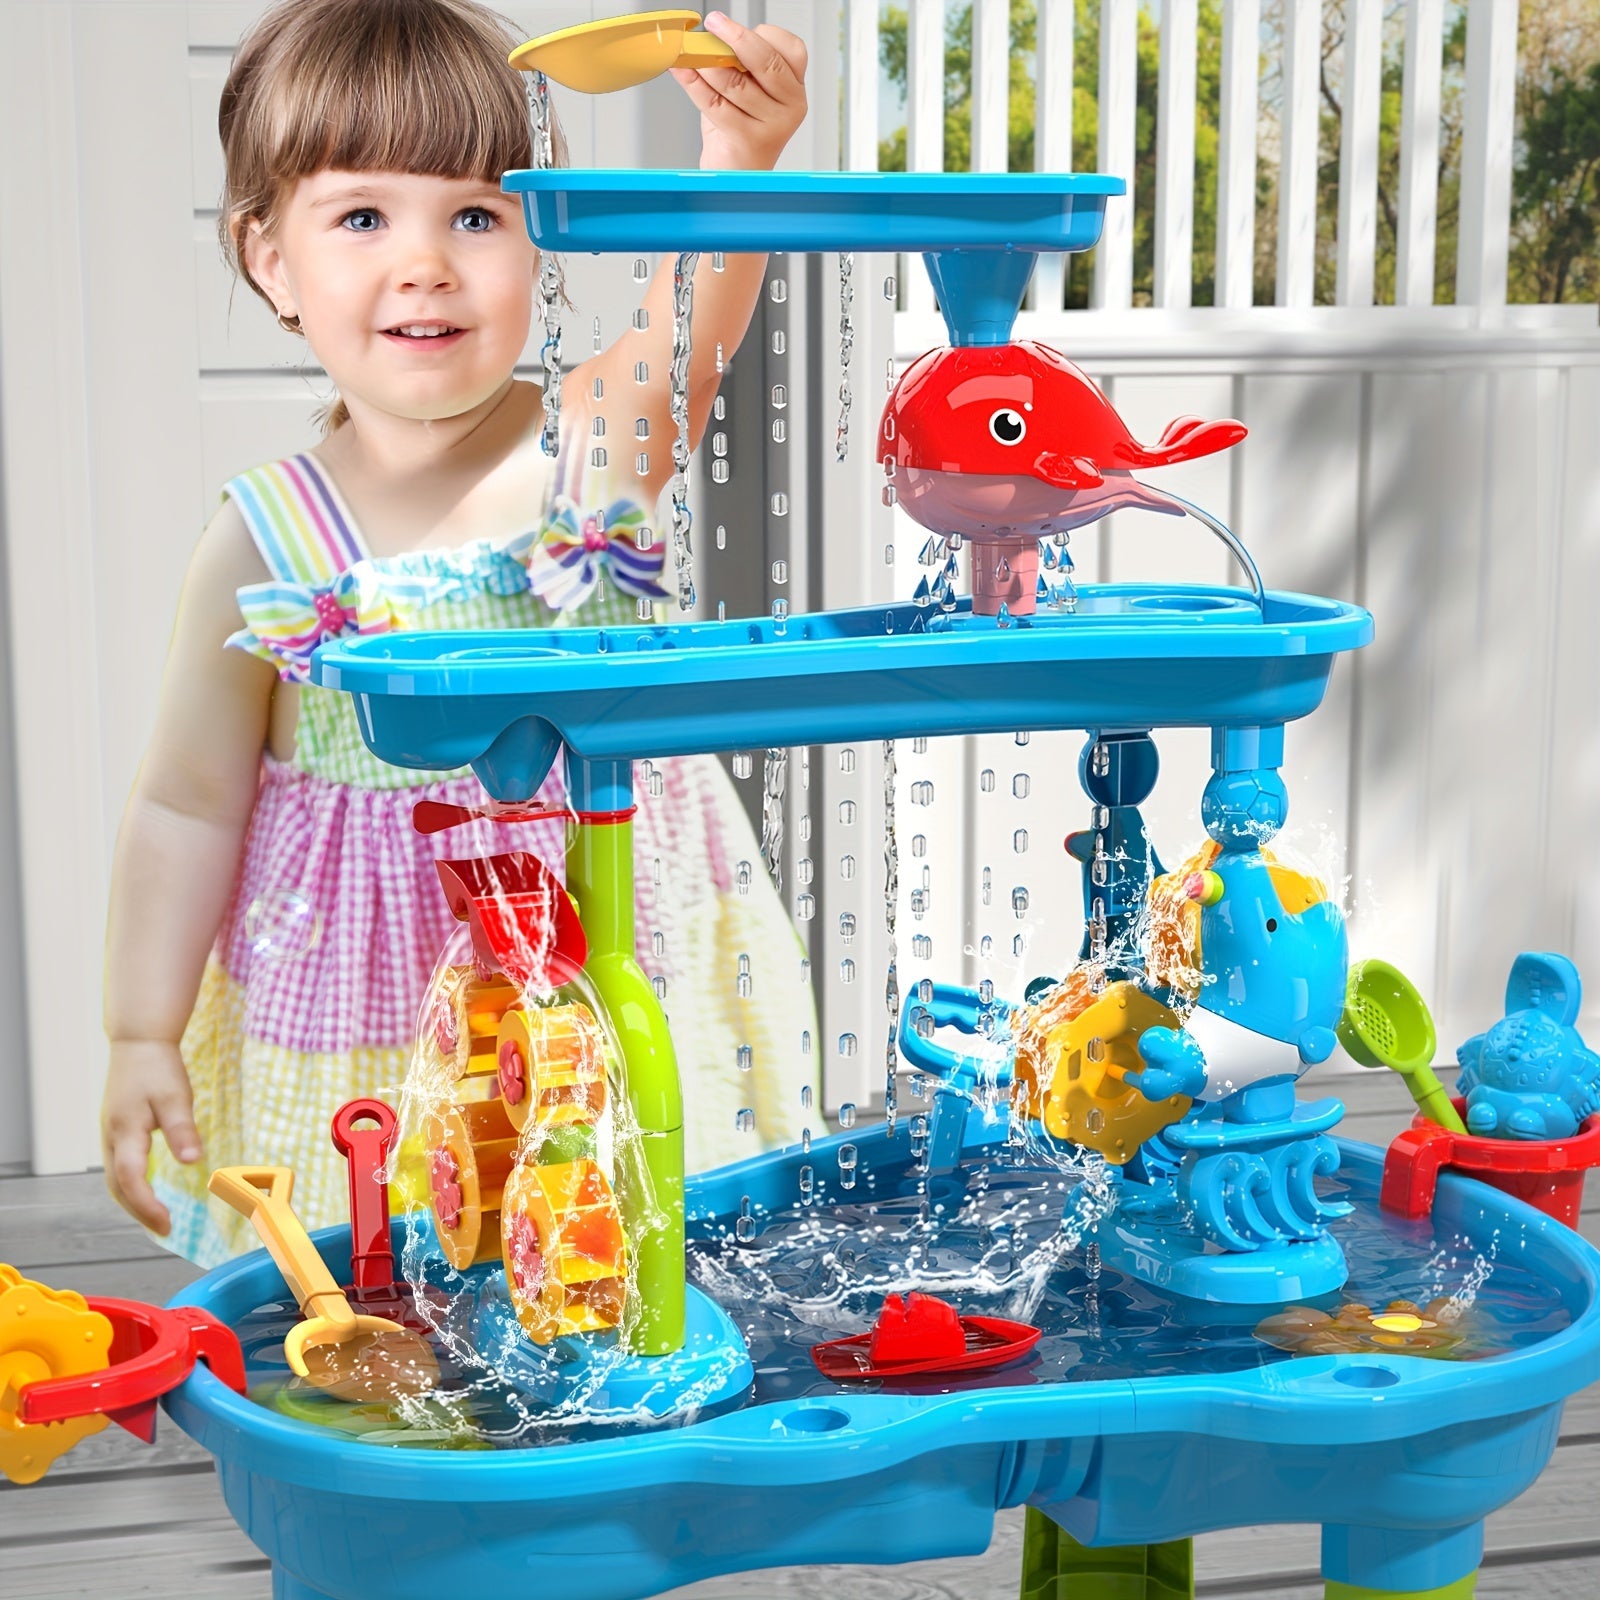 Kids Sand Water Table For Toddlers, 3-Tier Sand And Water Play Table Toys Cykapu